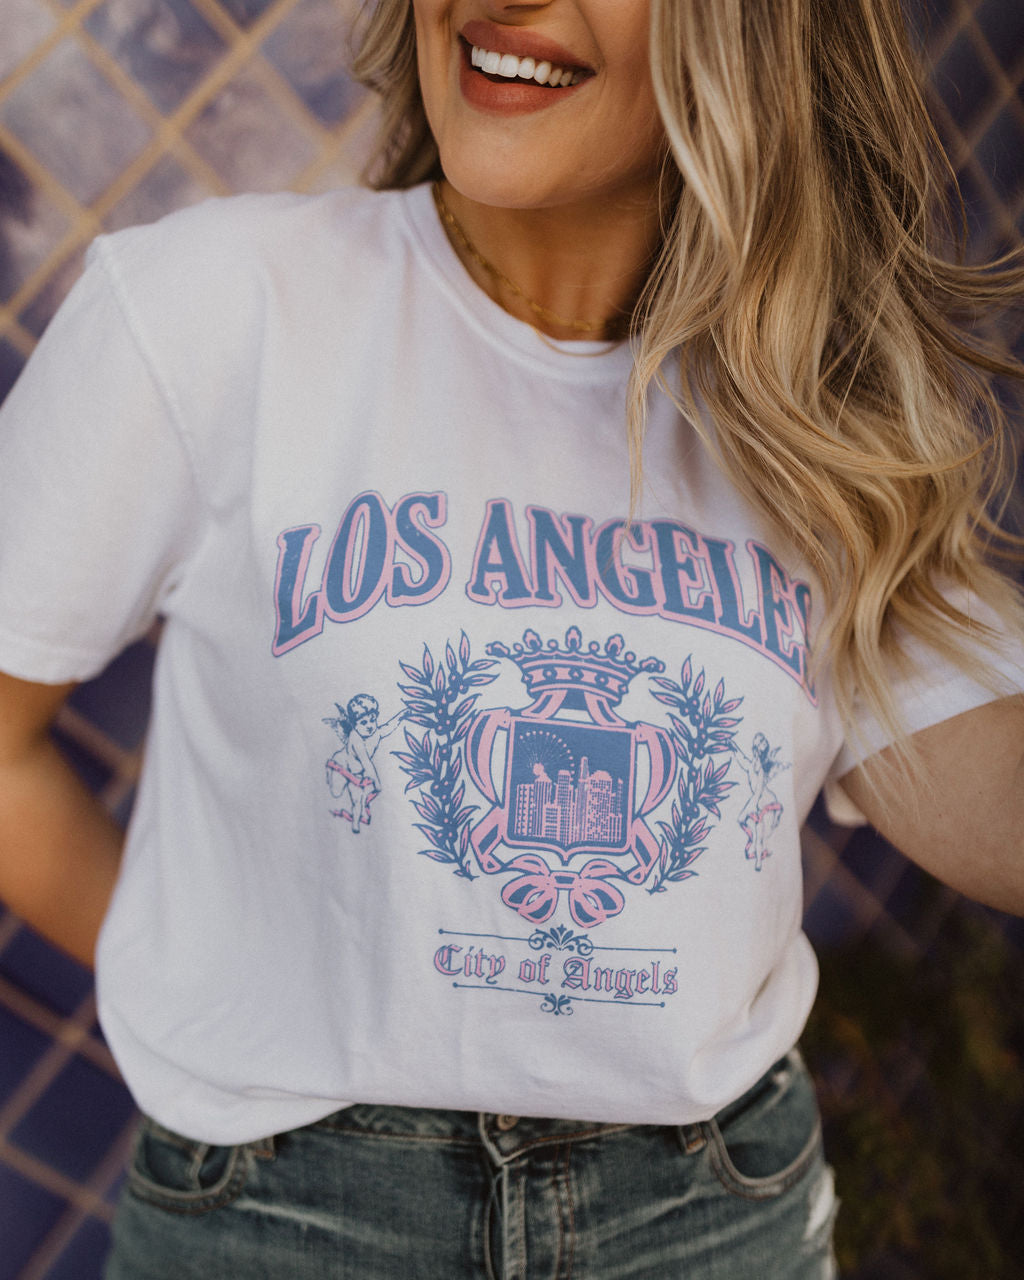 THE LOS ANGELES GRAPHIC TEE IN IVORY